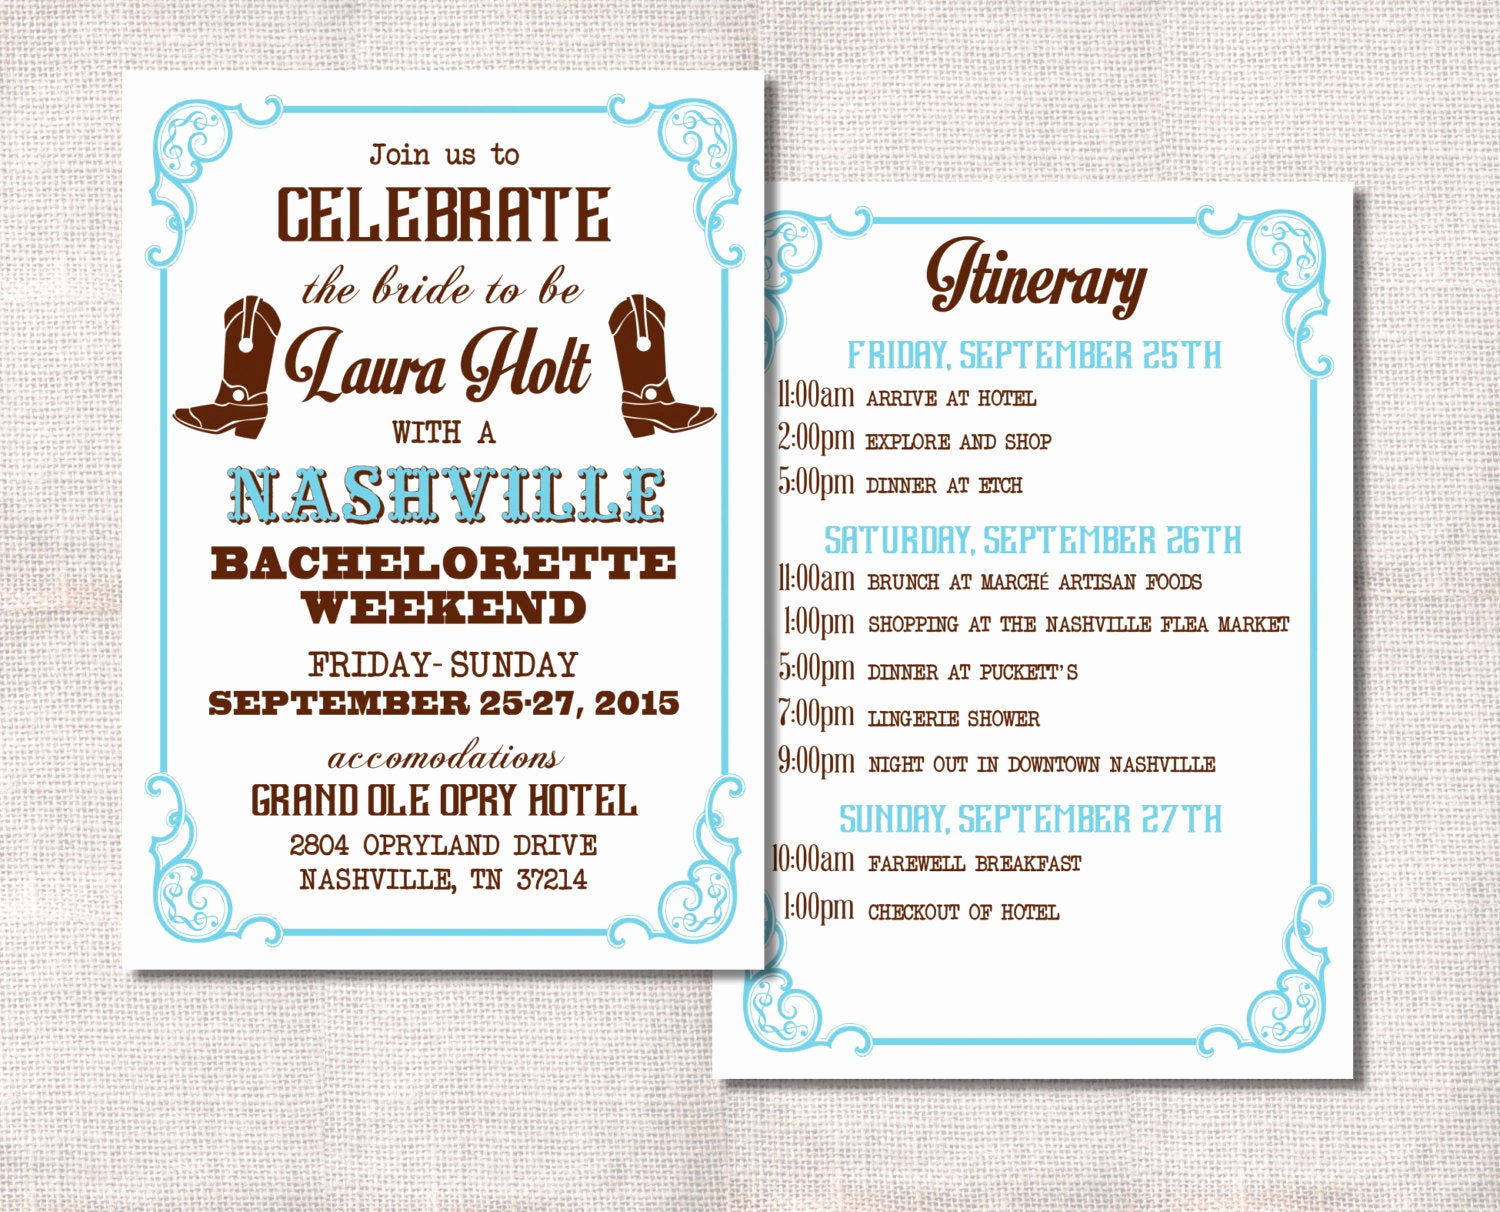 Bachelorette Party Itinerary Template Awesome Bachelorette Party Weekend Invitation and Itinerary Custom